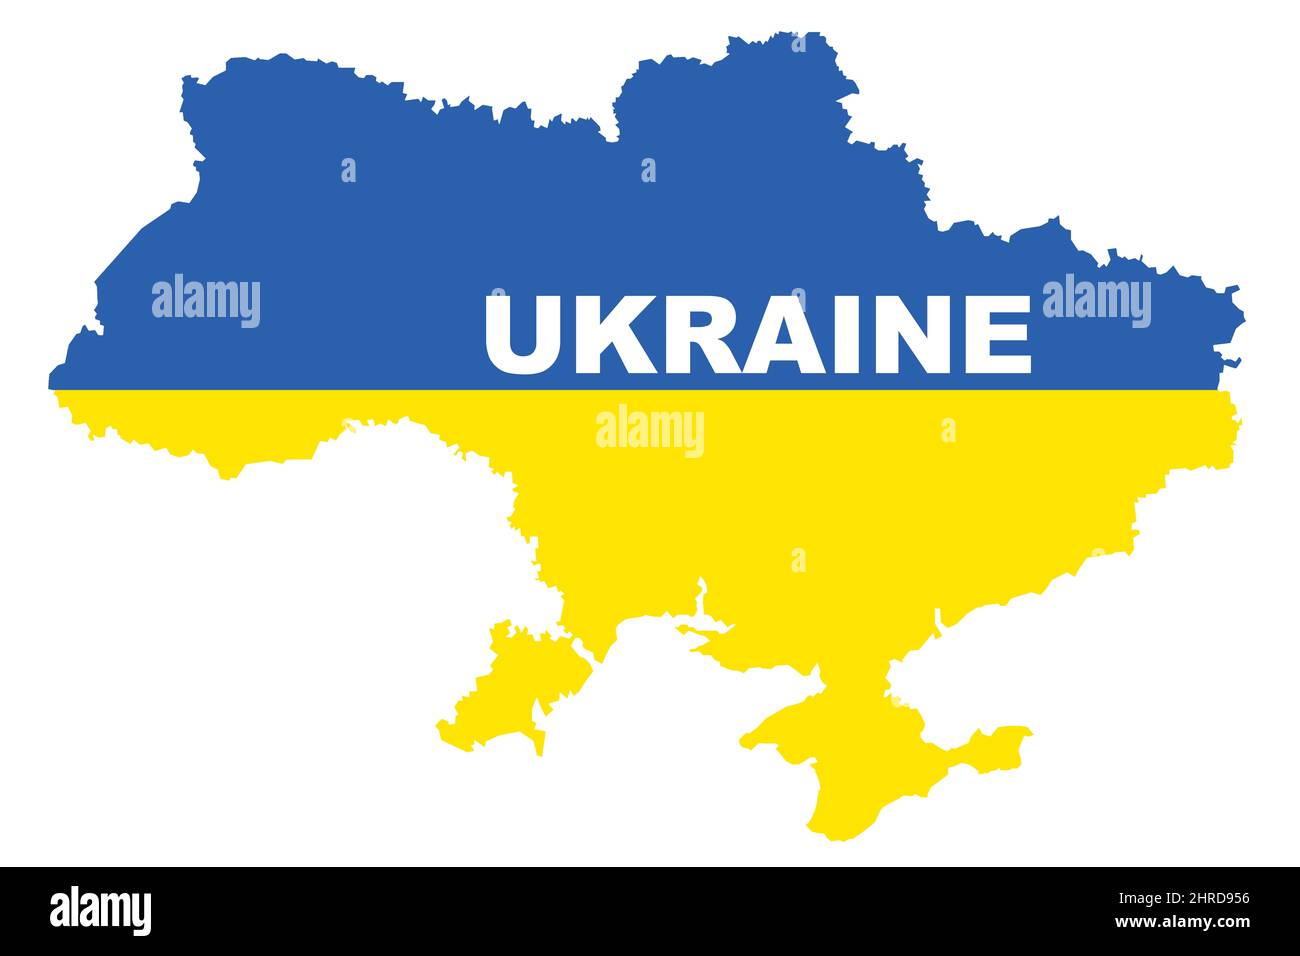 Ukraine map illustration in national blue and yellow colors isolated on white Stock Photo